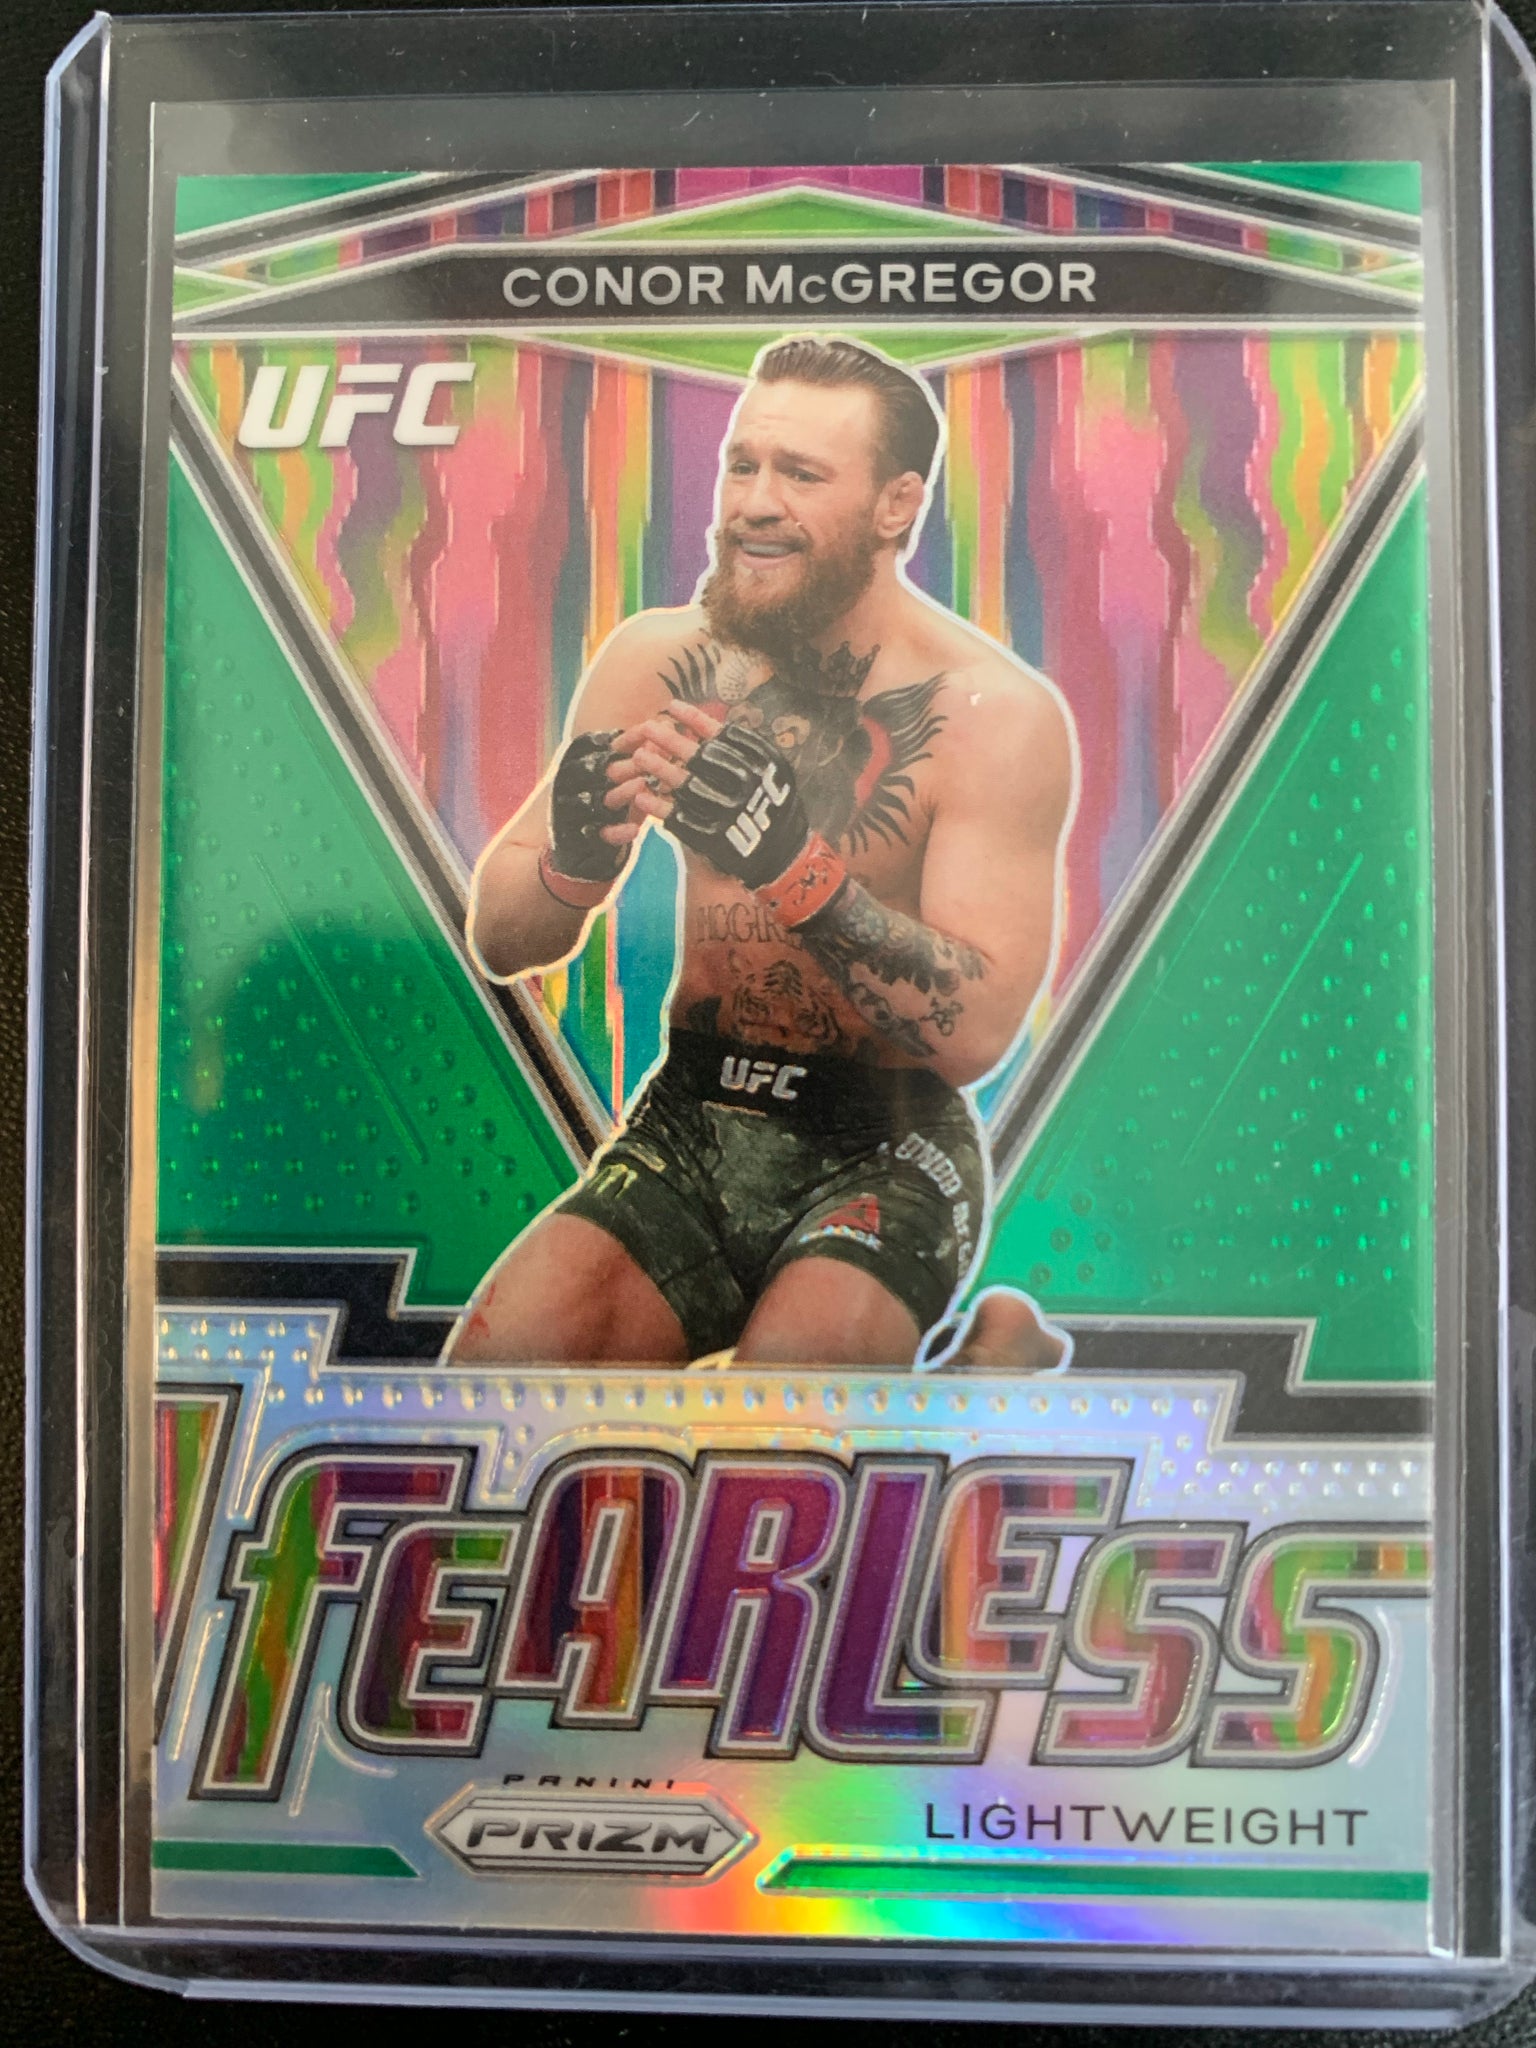 2021 PANINI PRIZM UFC # 1 - CONOR MCGREGOR FEARLESS GREEN PARALLEL PRIZM INSERT CARD